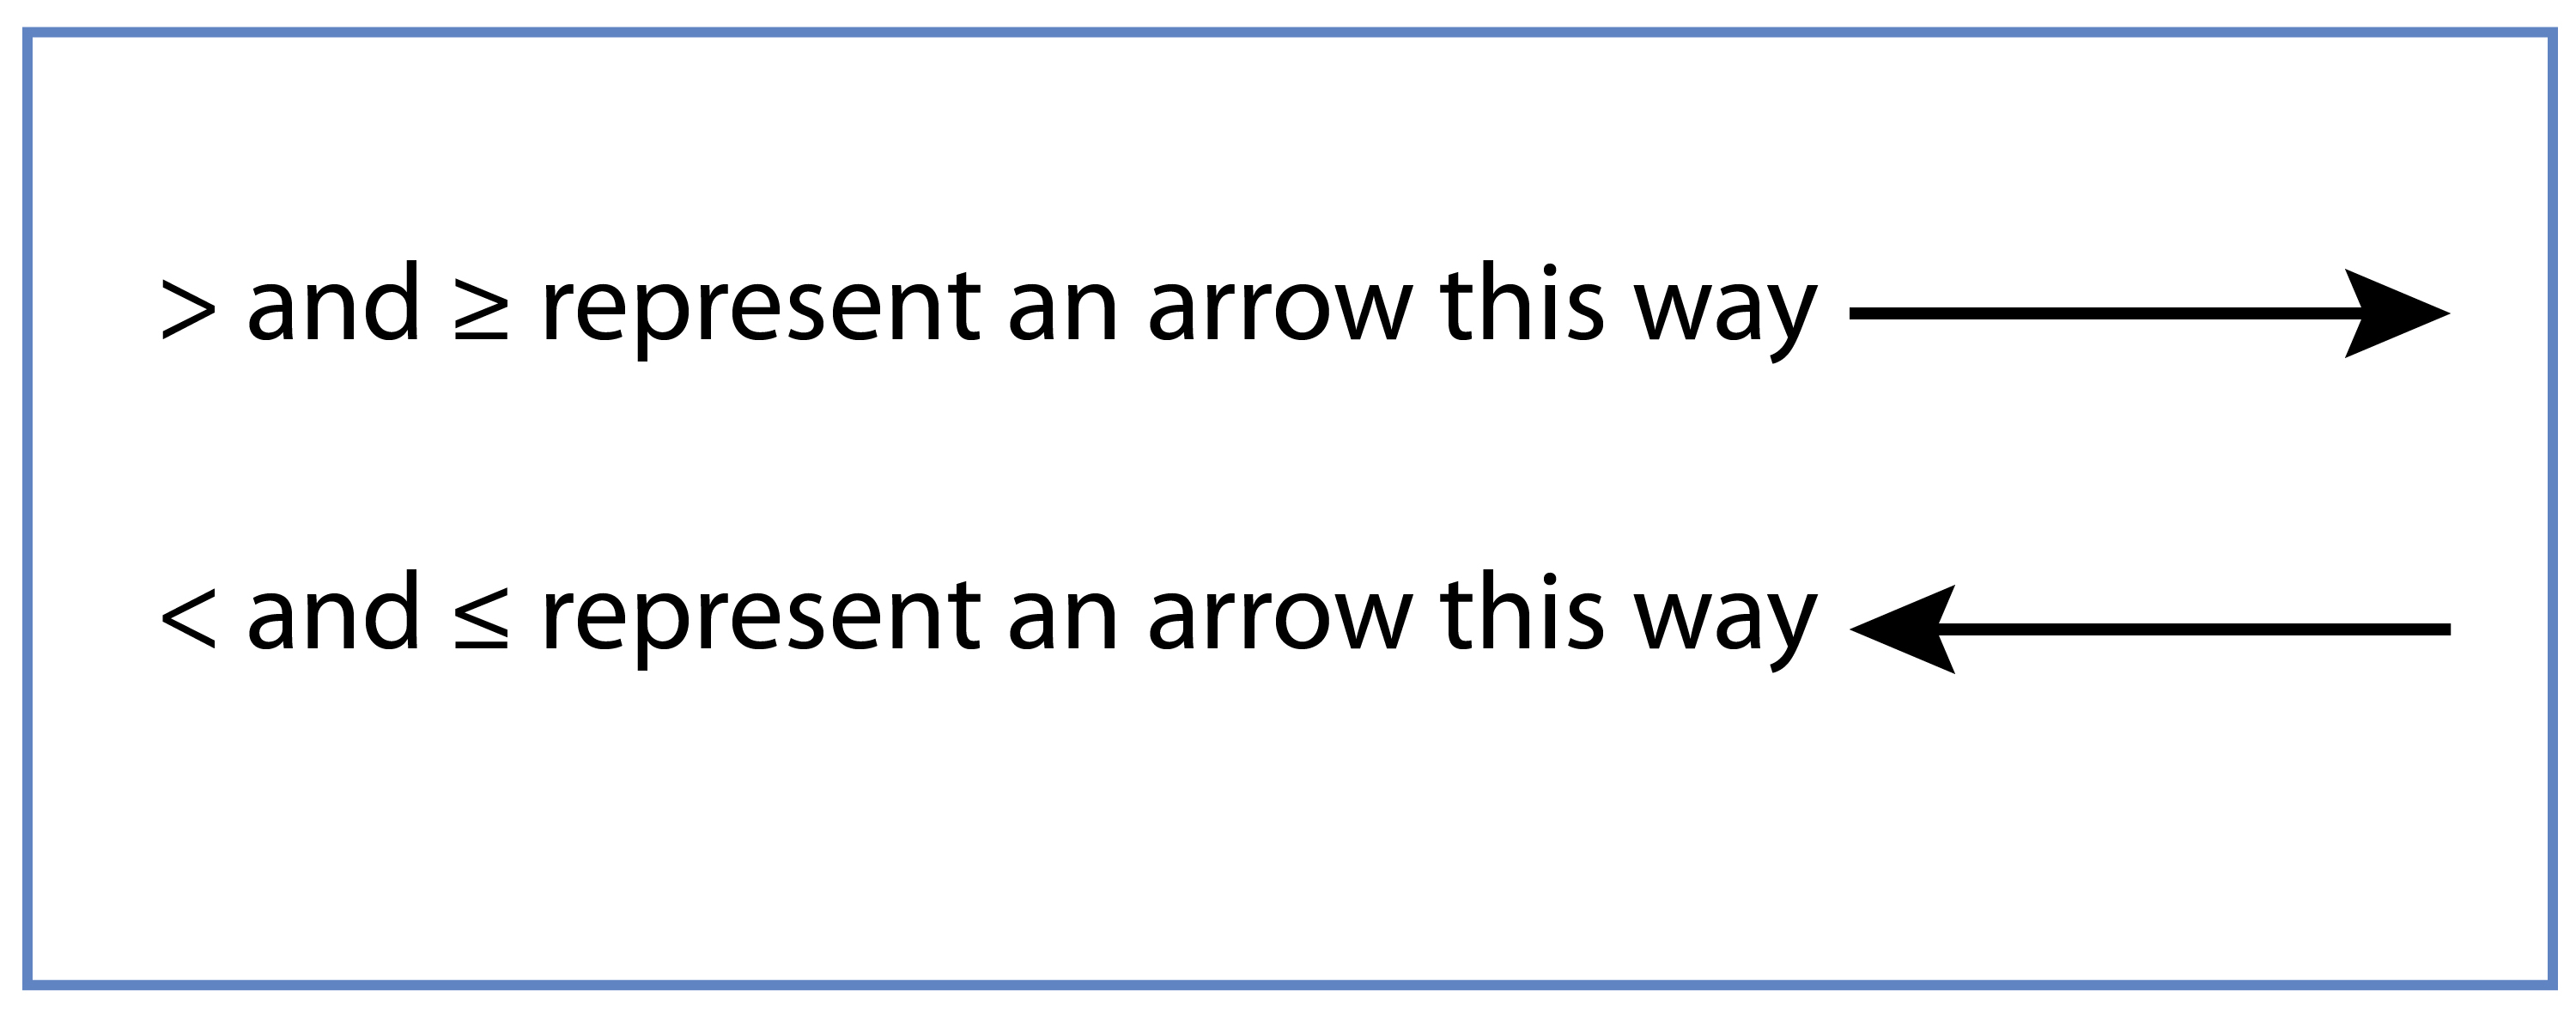 Greater than and less than can be represented as arrows a long the number line